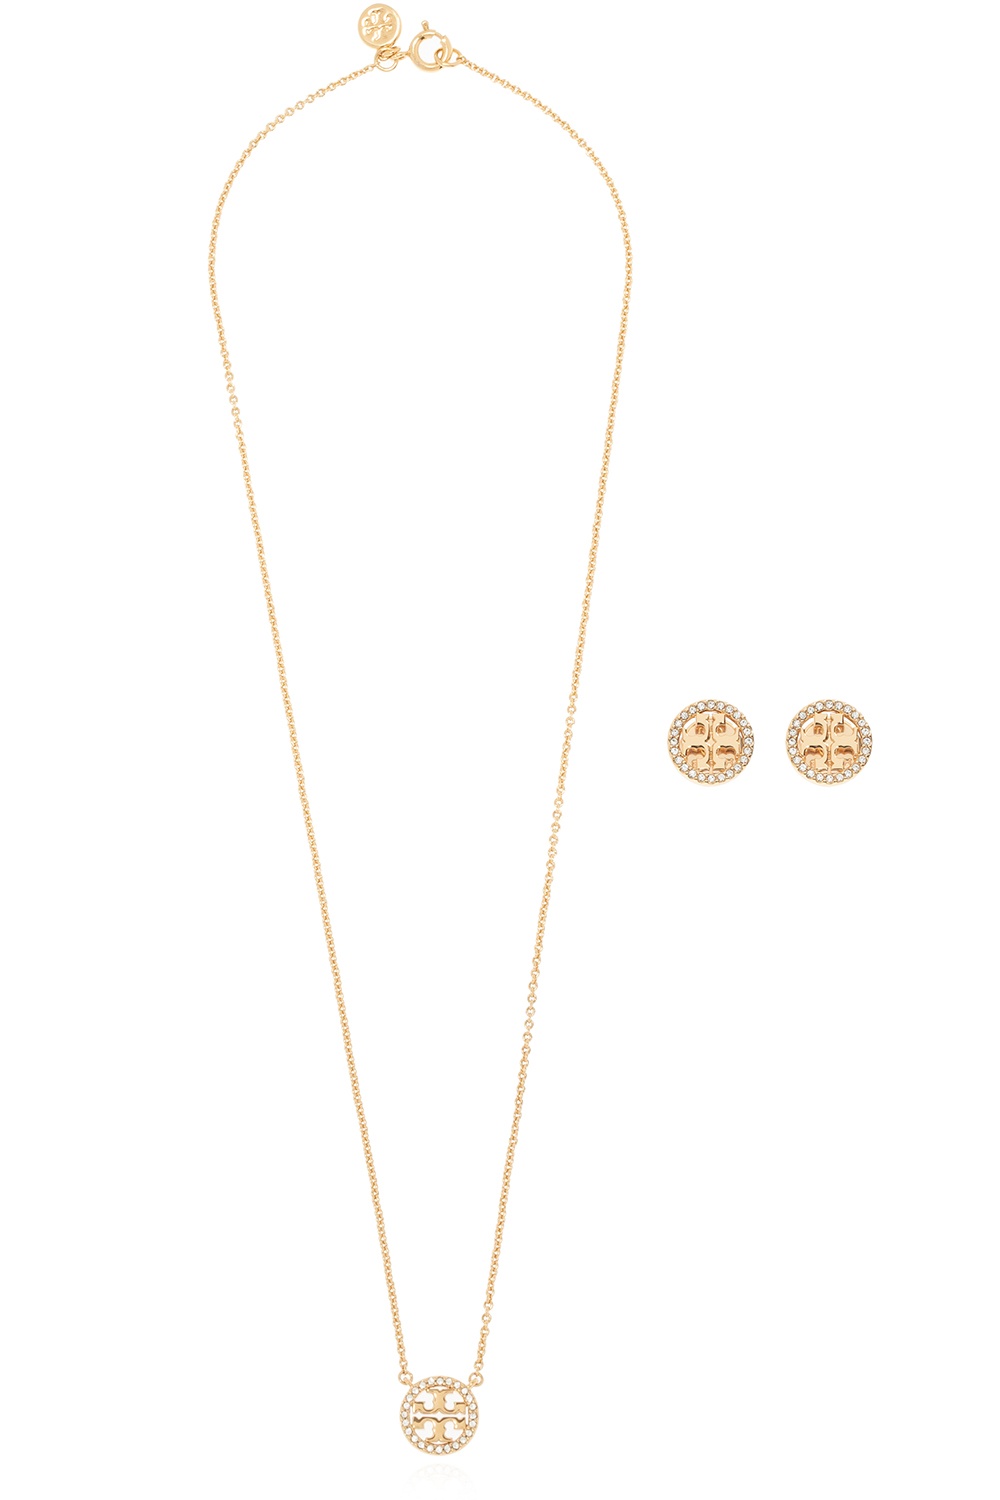 Introducir 111+ imagen tory burch necklace and earrings